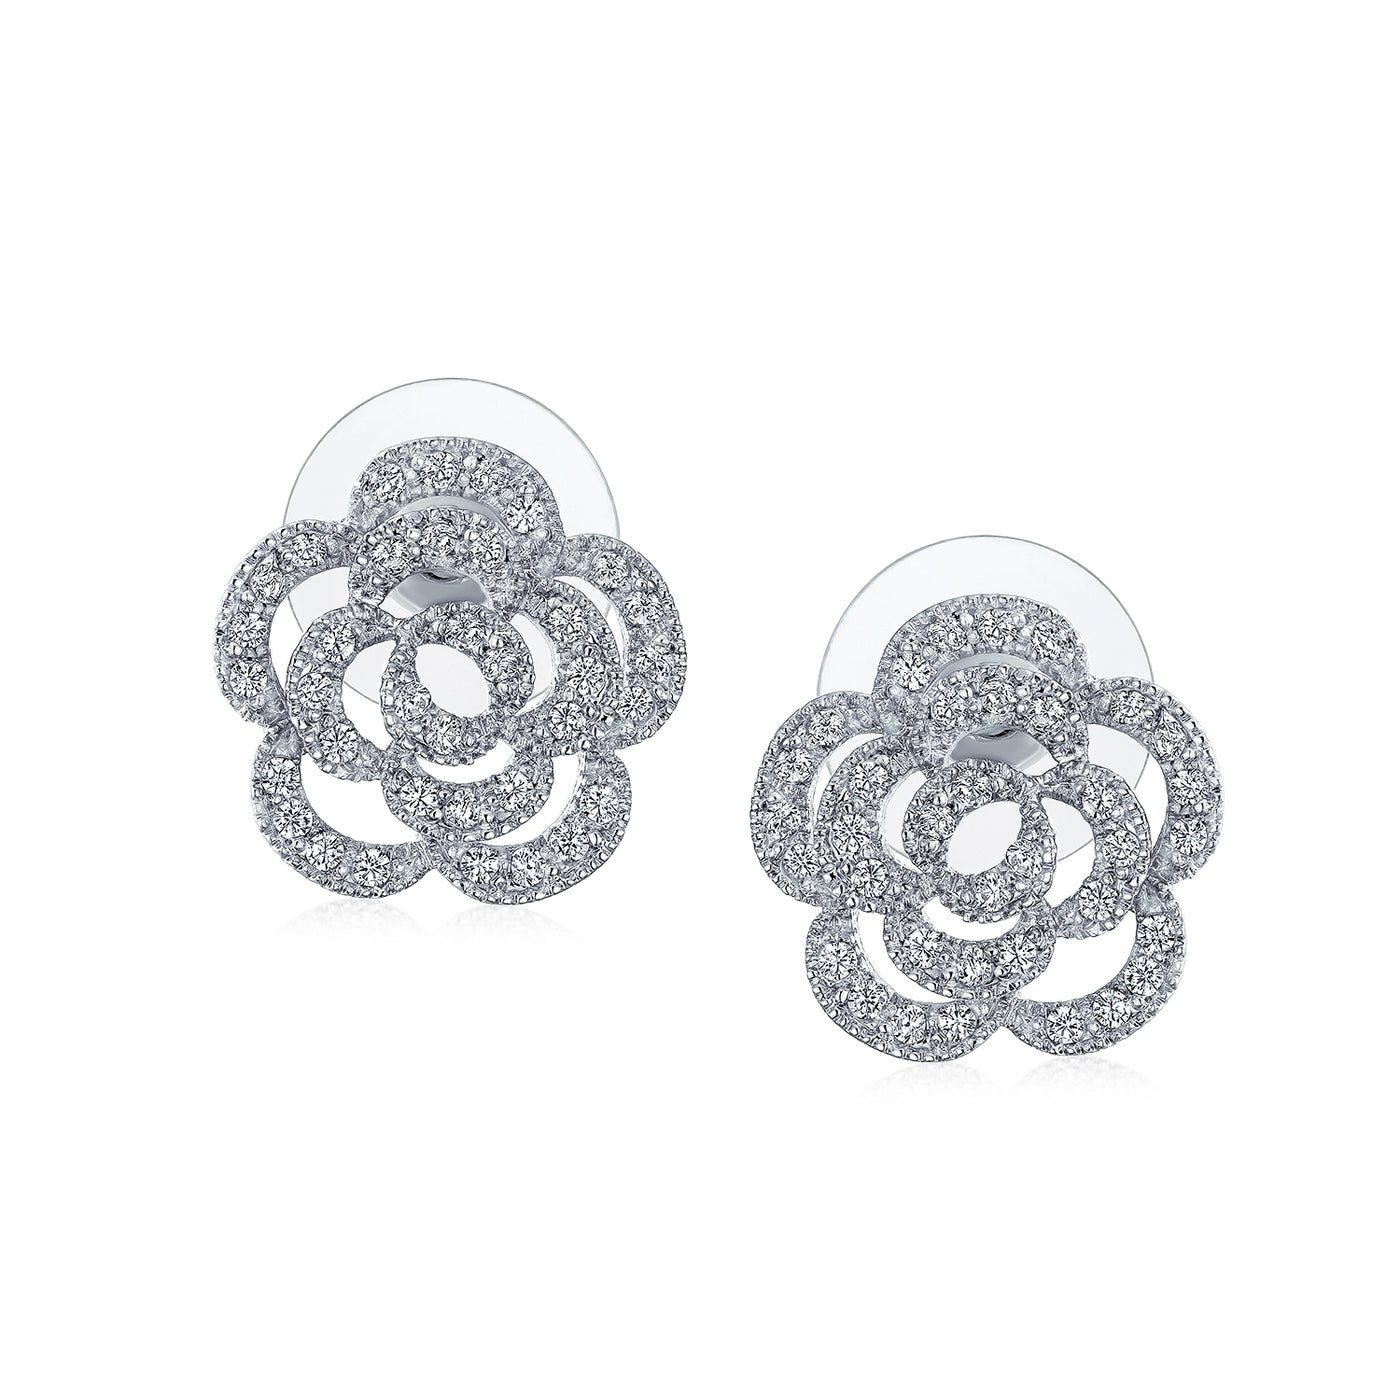 Bridal Pave CZ Accent Open Floral Love Rose Flower Stud Earrings